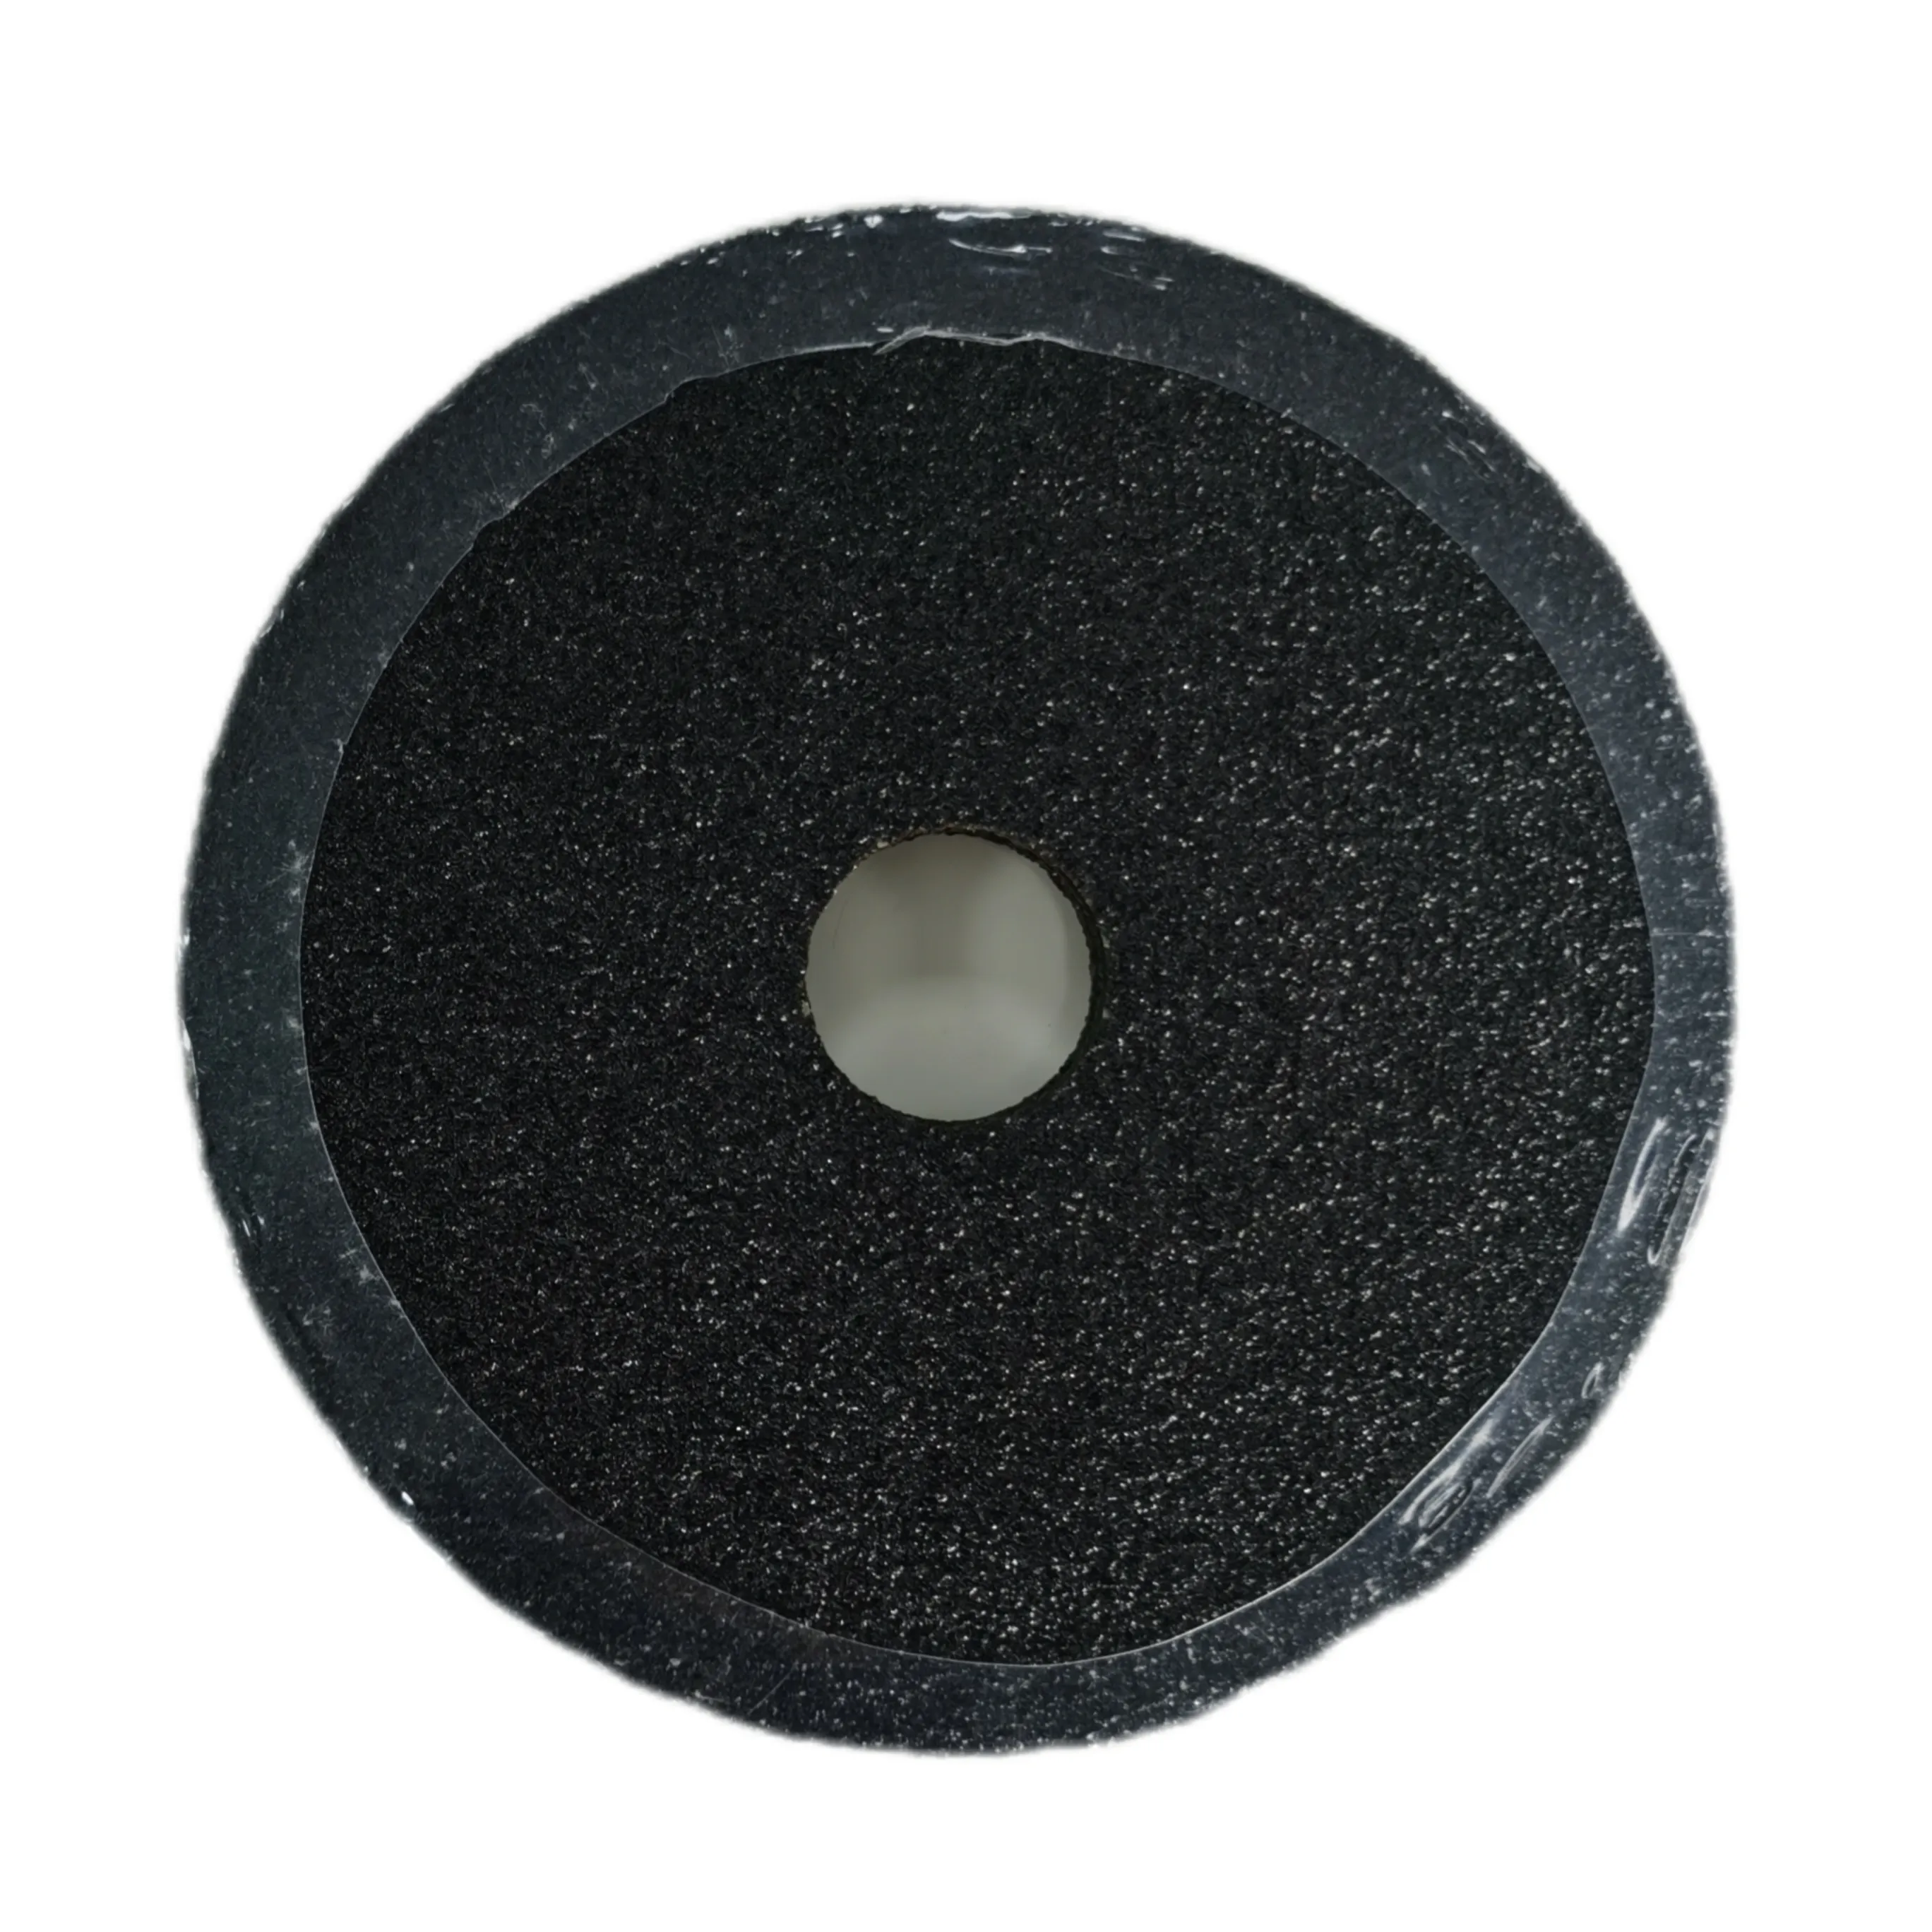 5inch Silicon Carbide Resin Fiber Sanding Discs With Center Hole Fiber Disc With Cross Hole Grinding Polishing Stone Marble